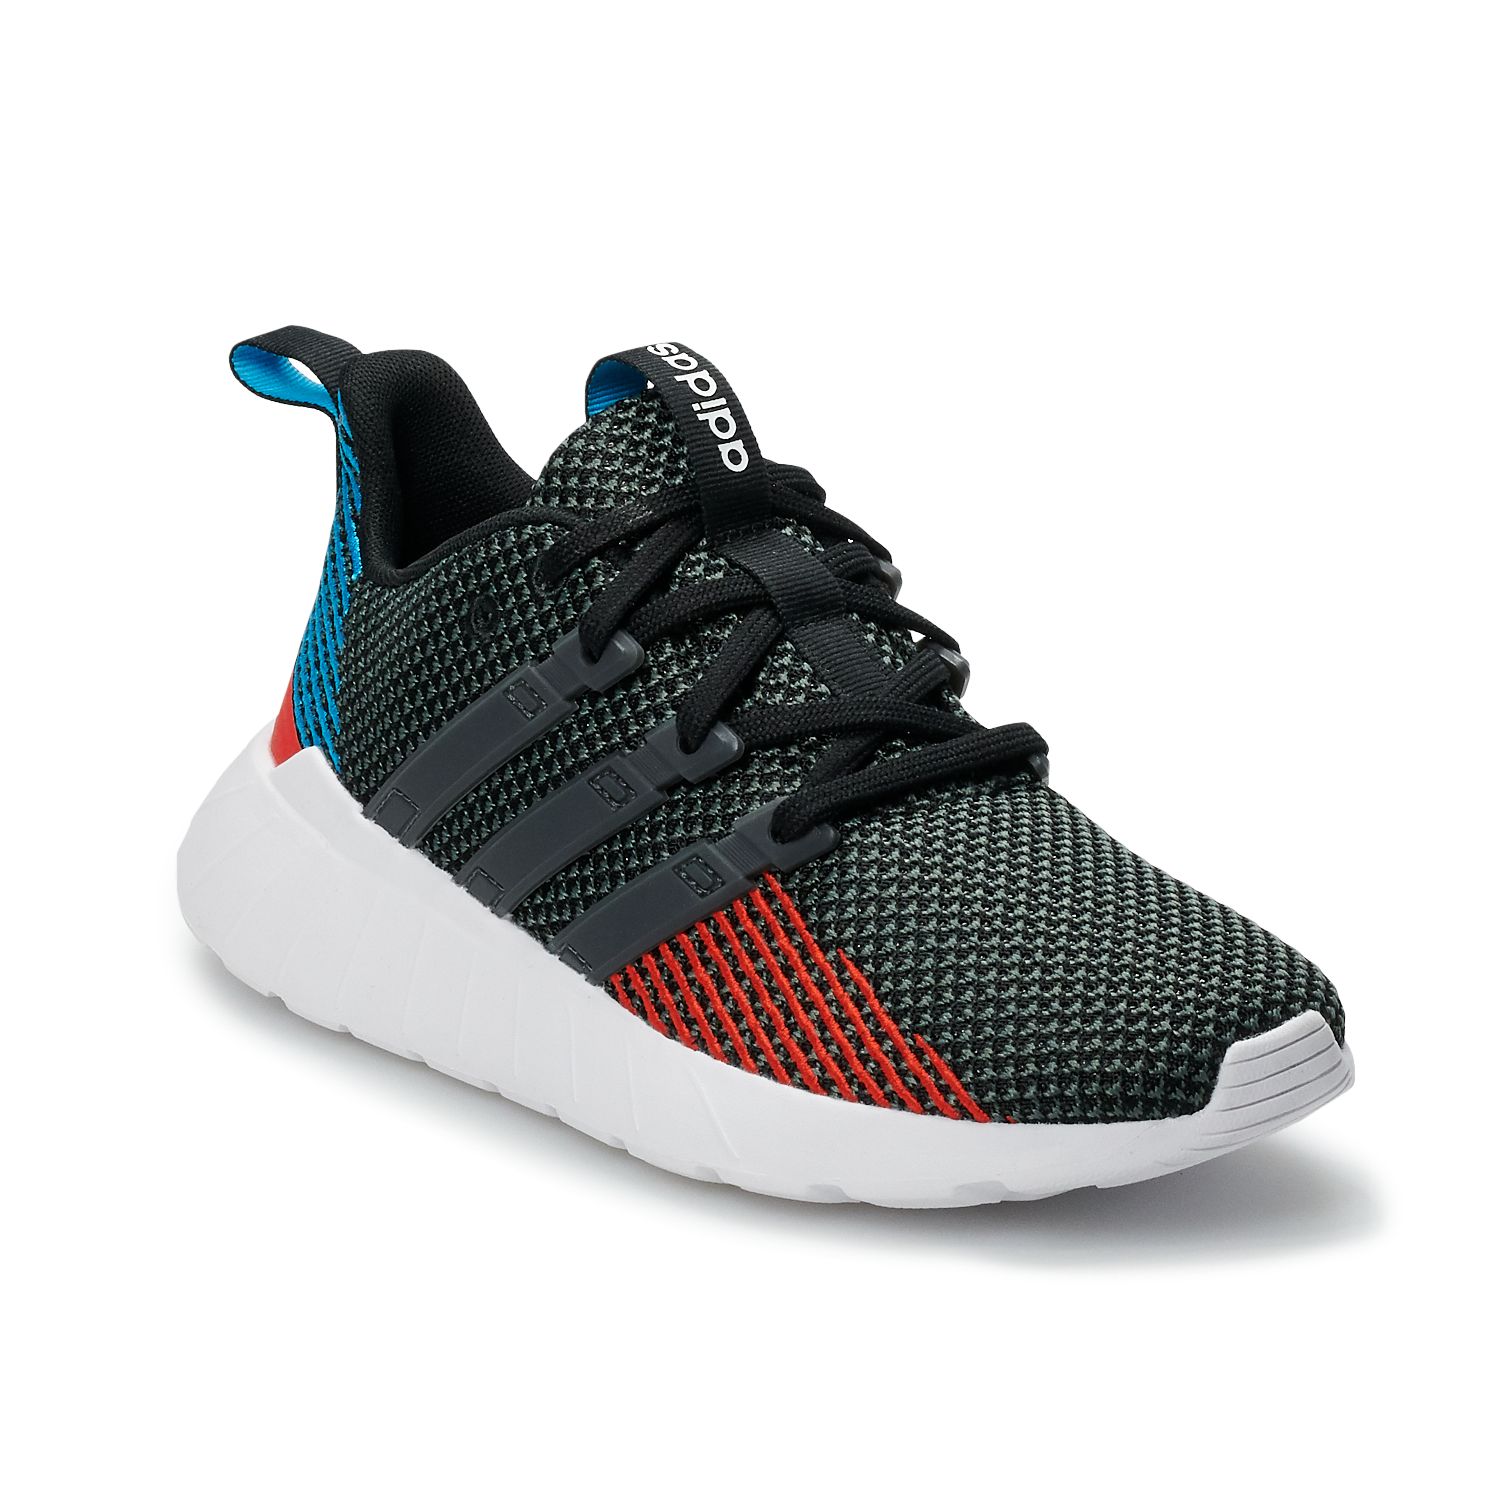 adidas shoes for boys